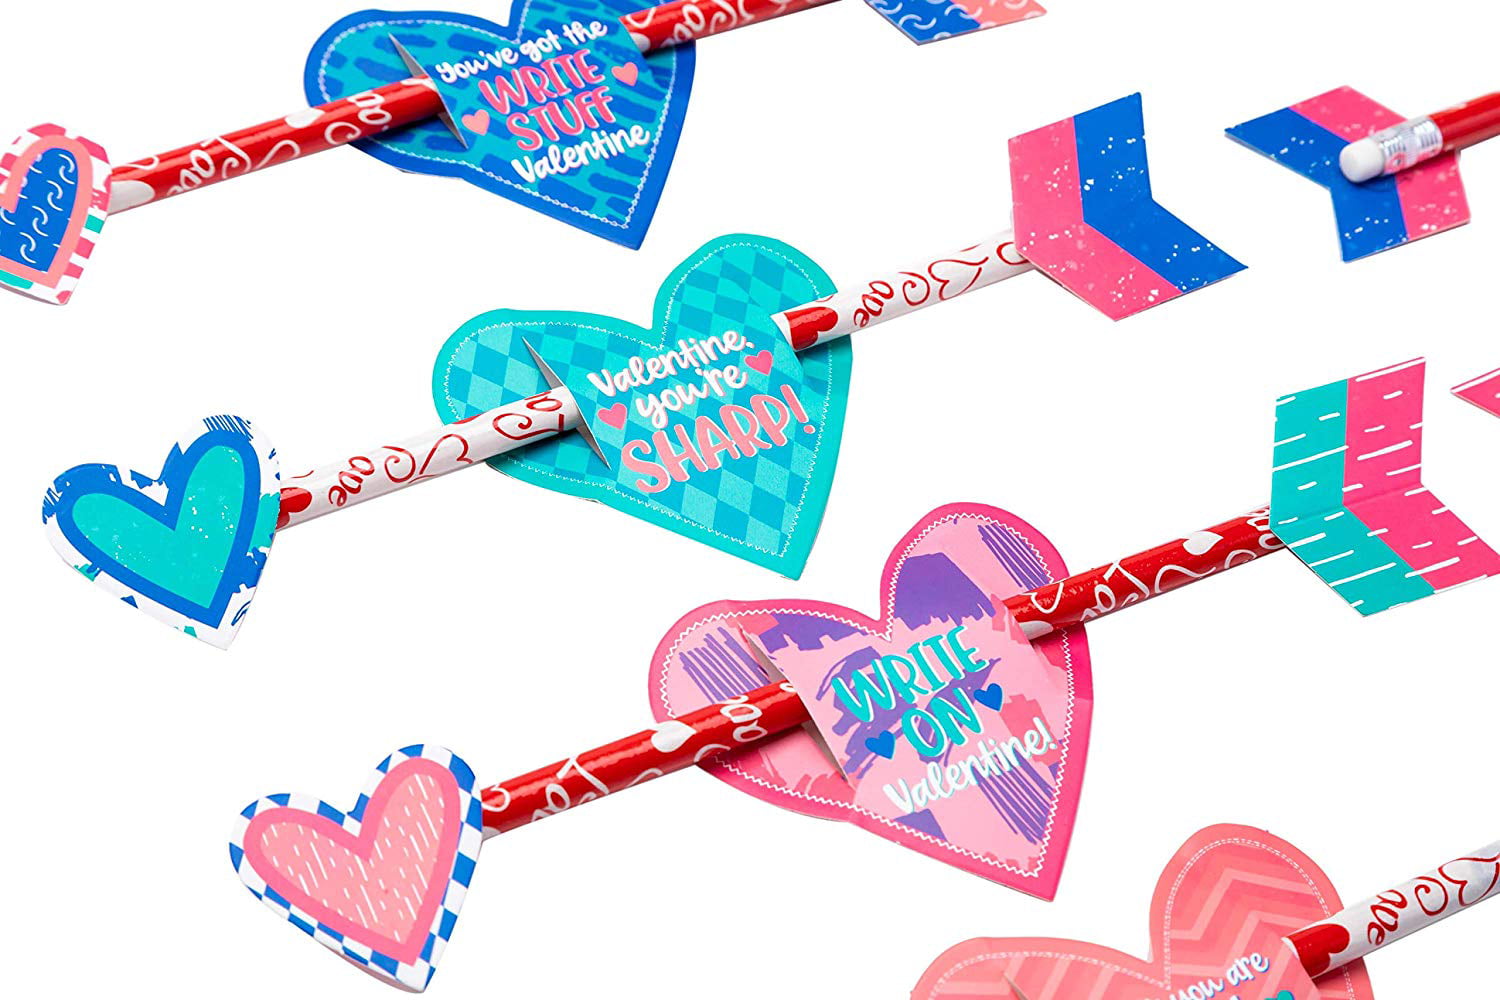 Valentines Day Gift Cards and 36 pack Gift Cupid's Arrow Pencil Set,  Valentine Classroom Exchange Prizes, Party Favors, Unicorn Valentine Cards,  